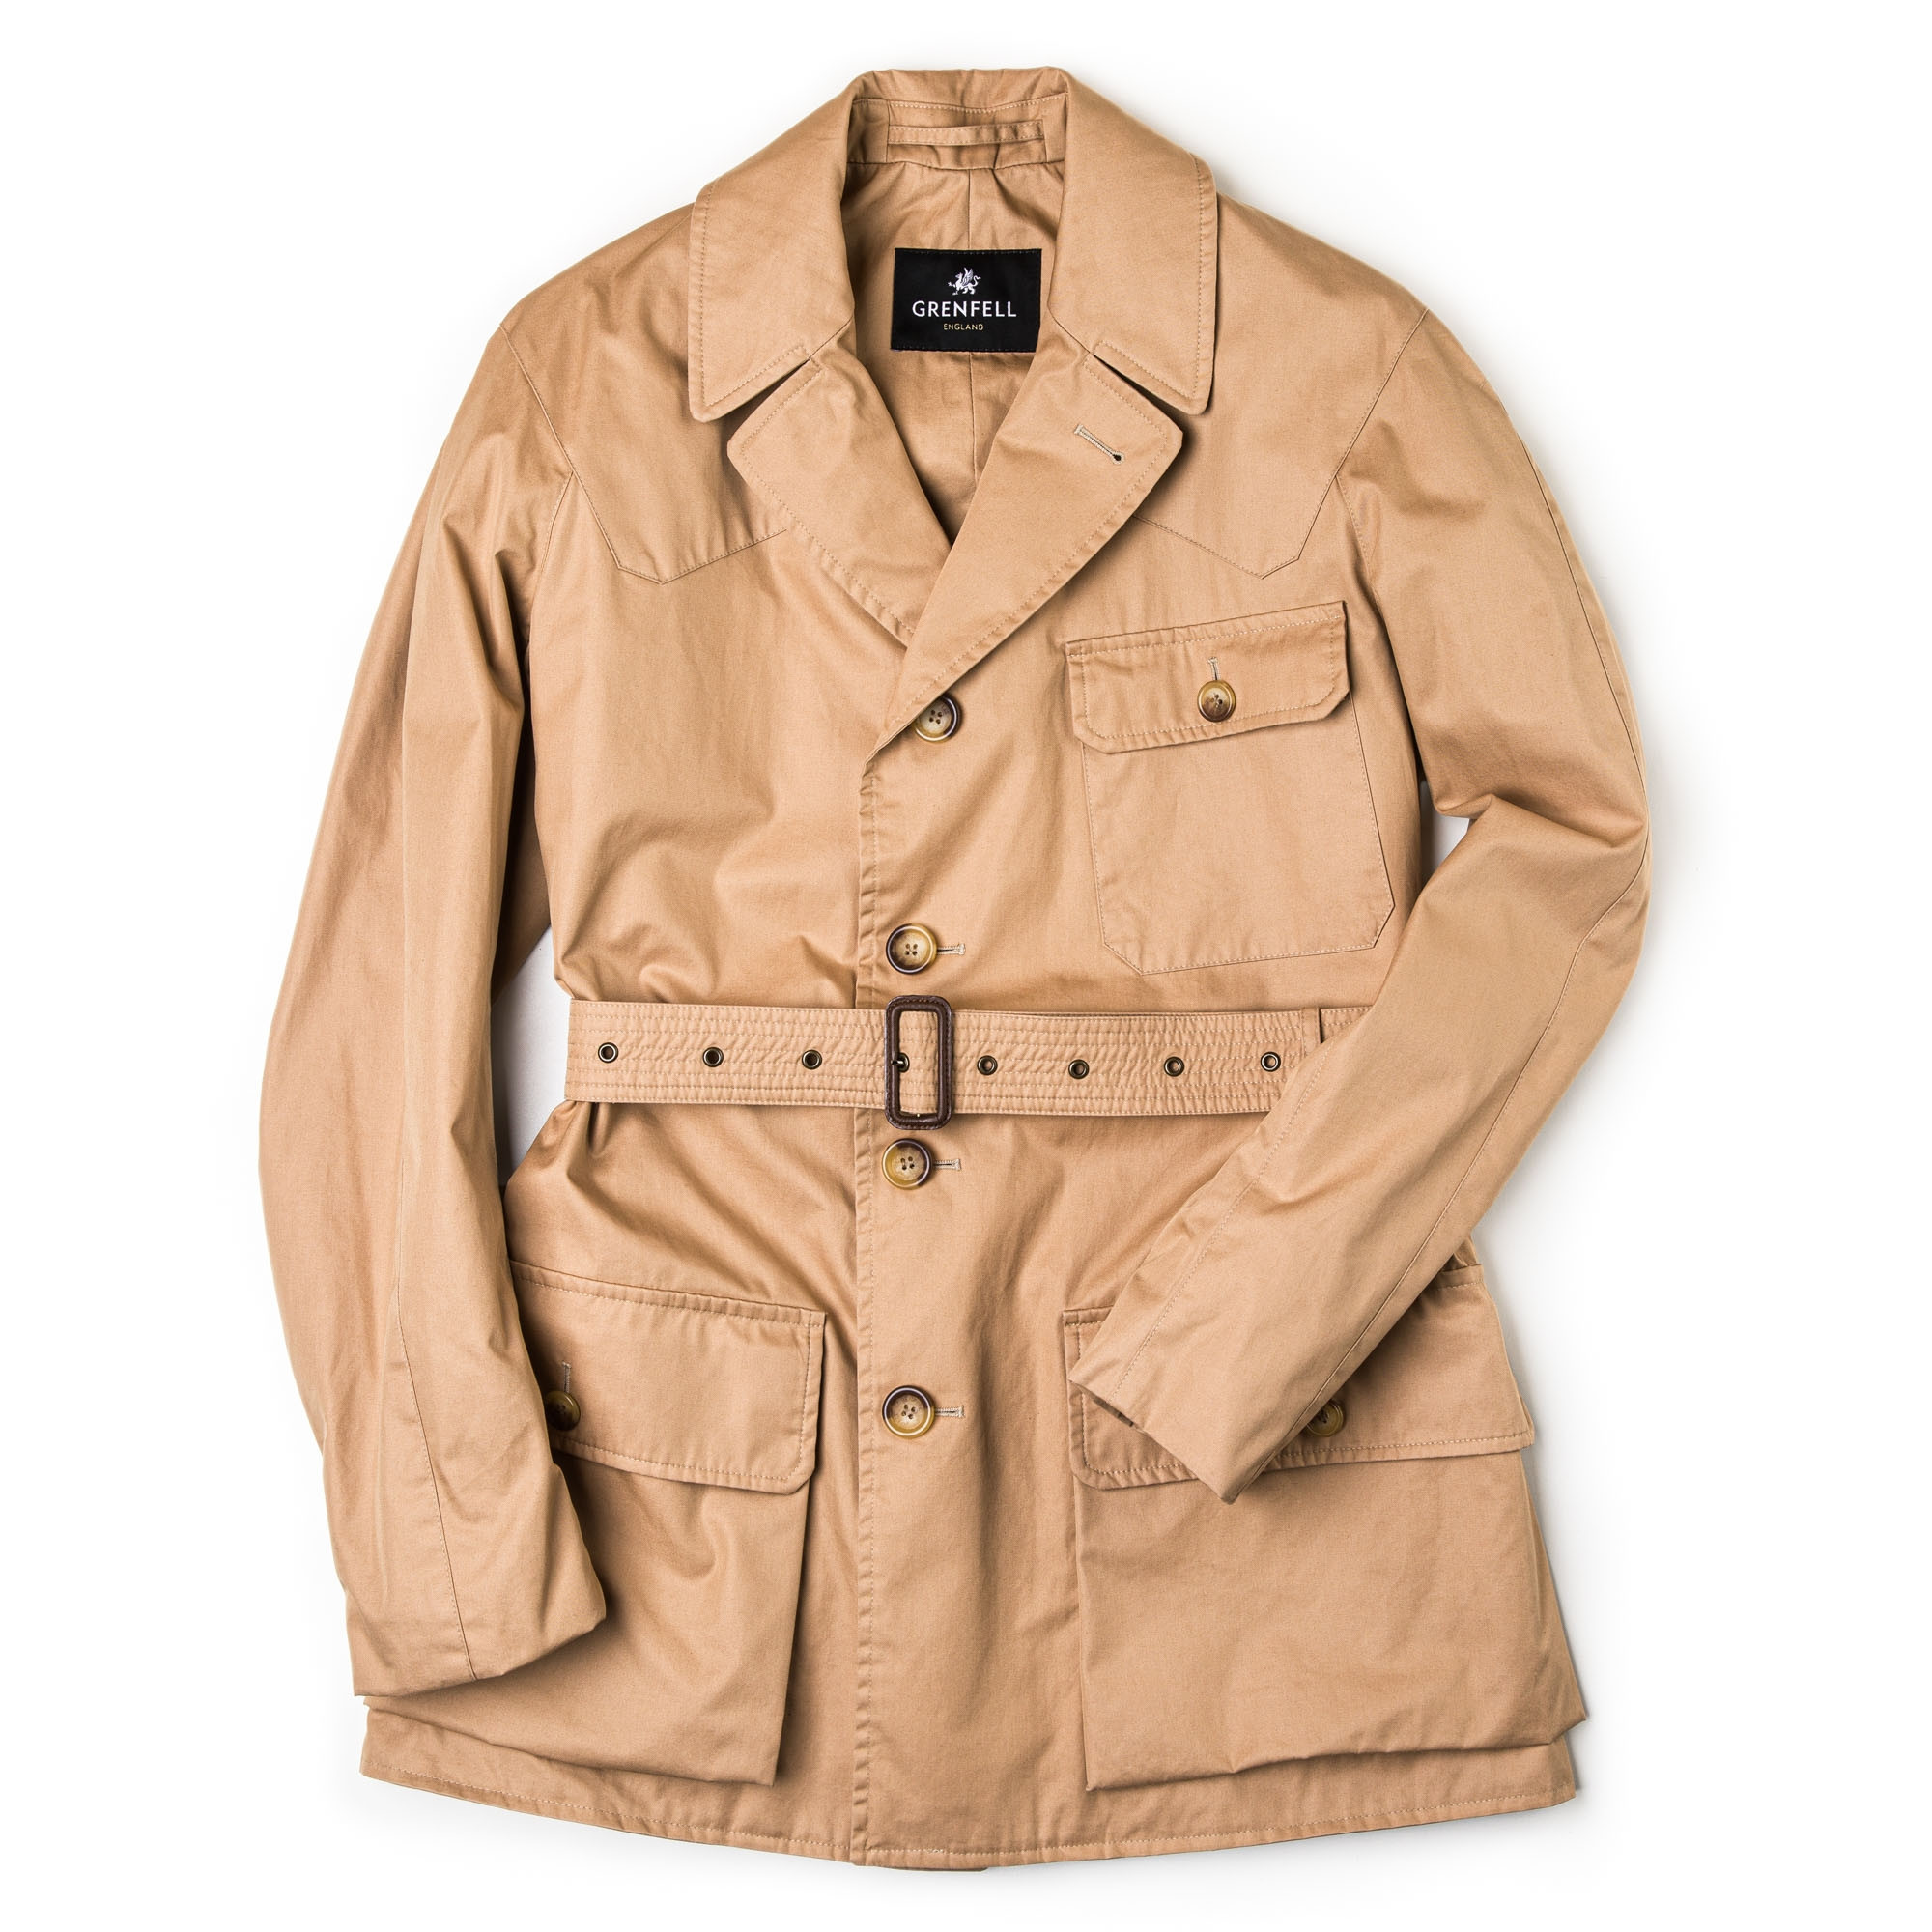 The Shooter Jacket in Biscuit